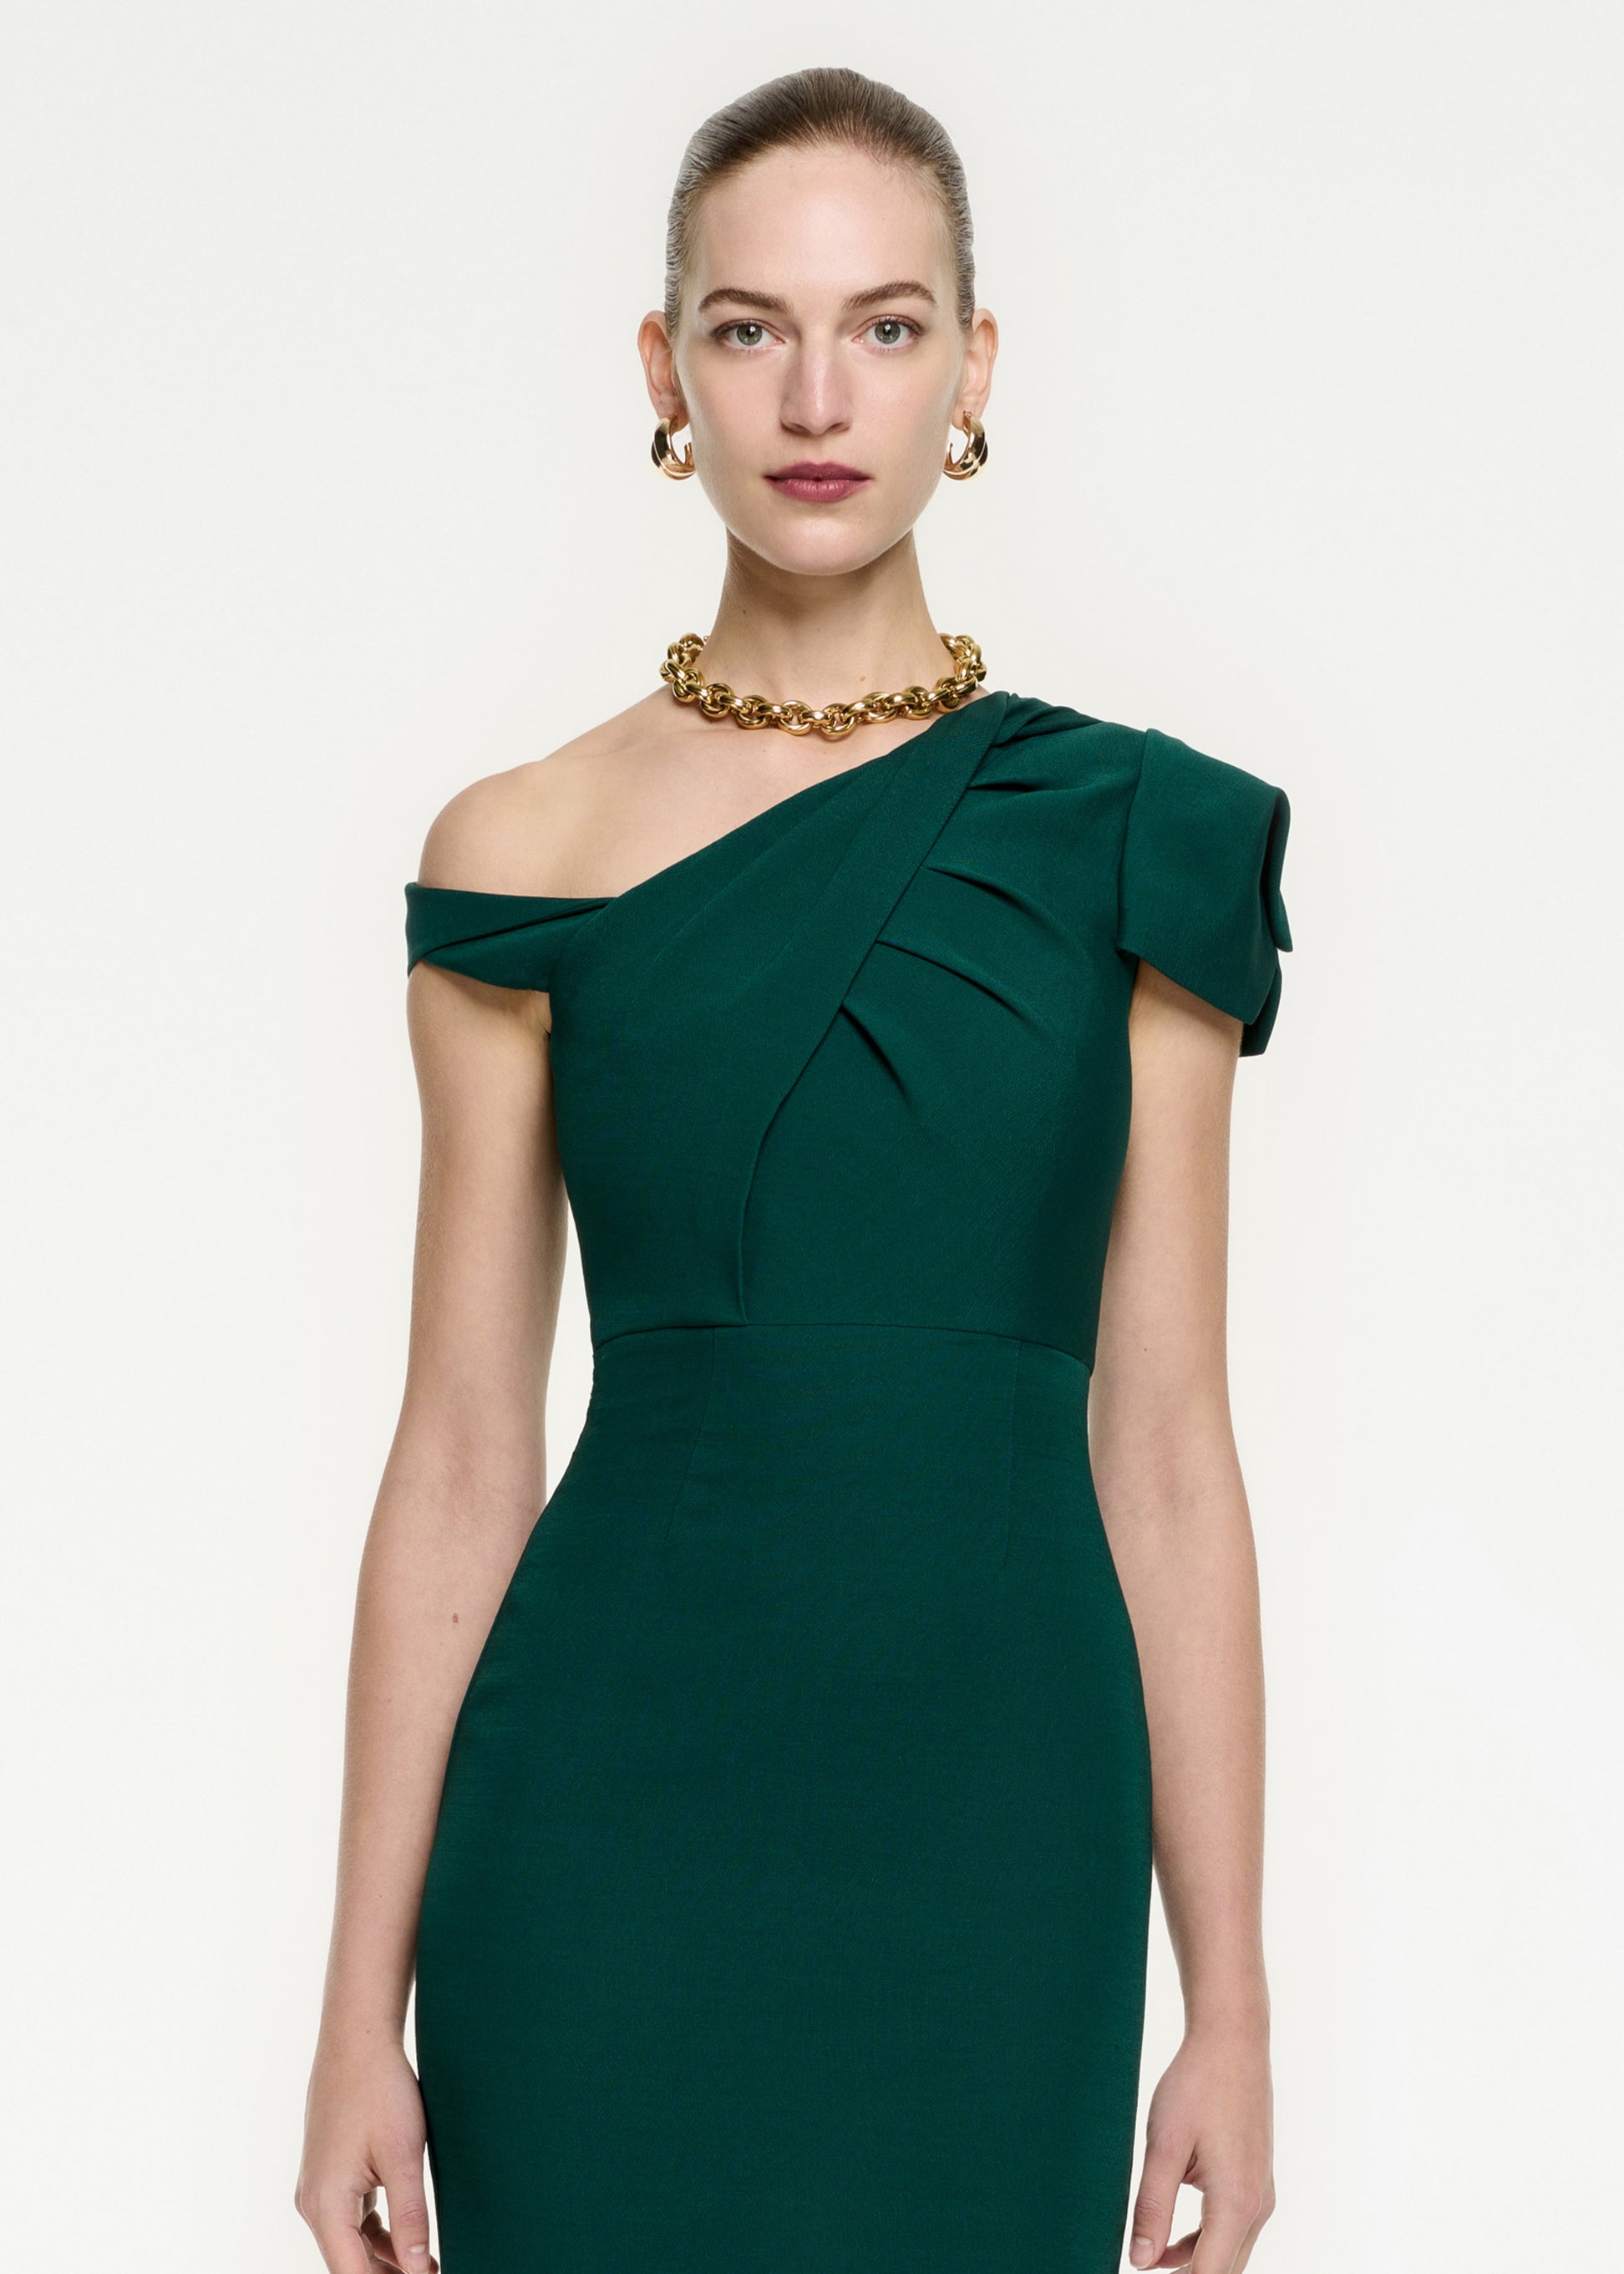 A close up of a woman wearing the Asymmetric Wool Silk Midi Dress in Green